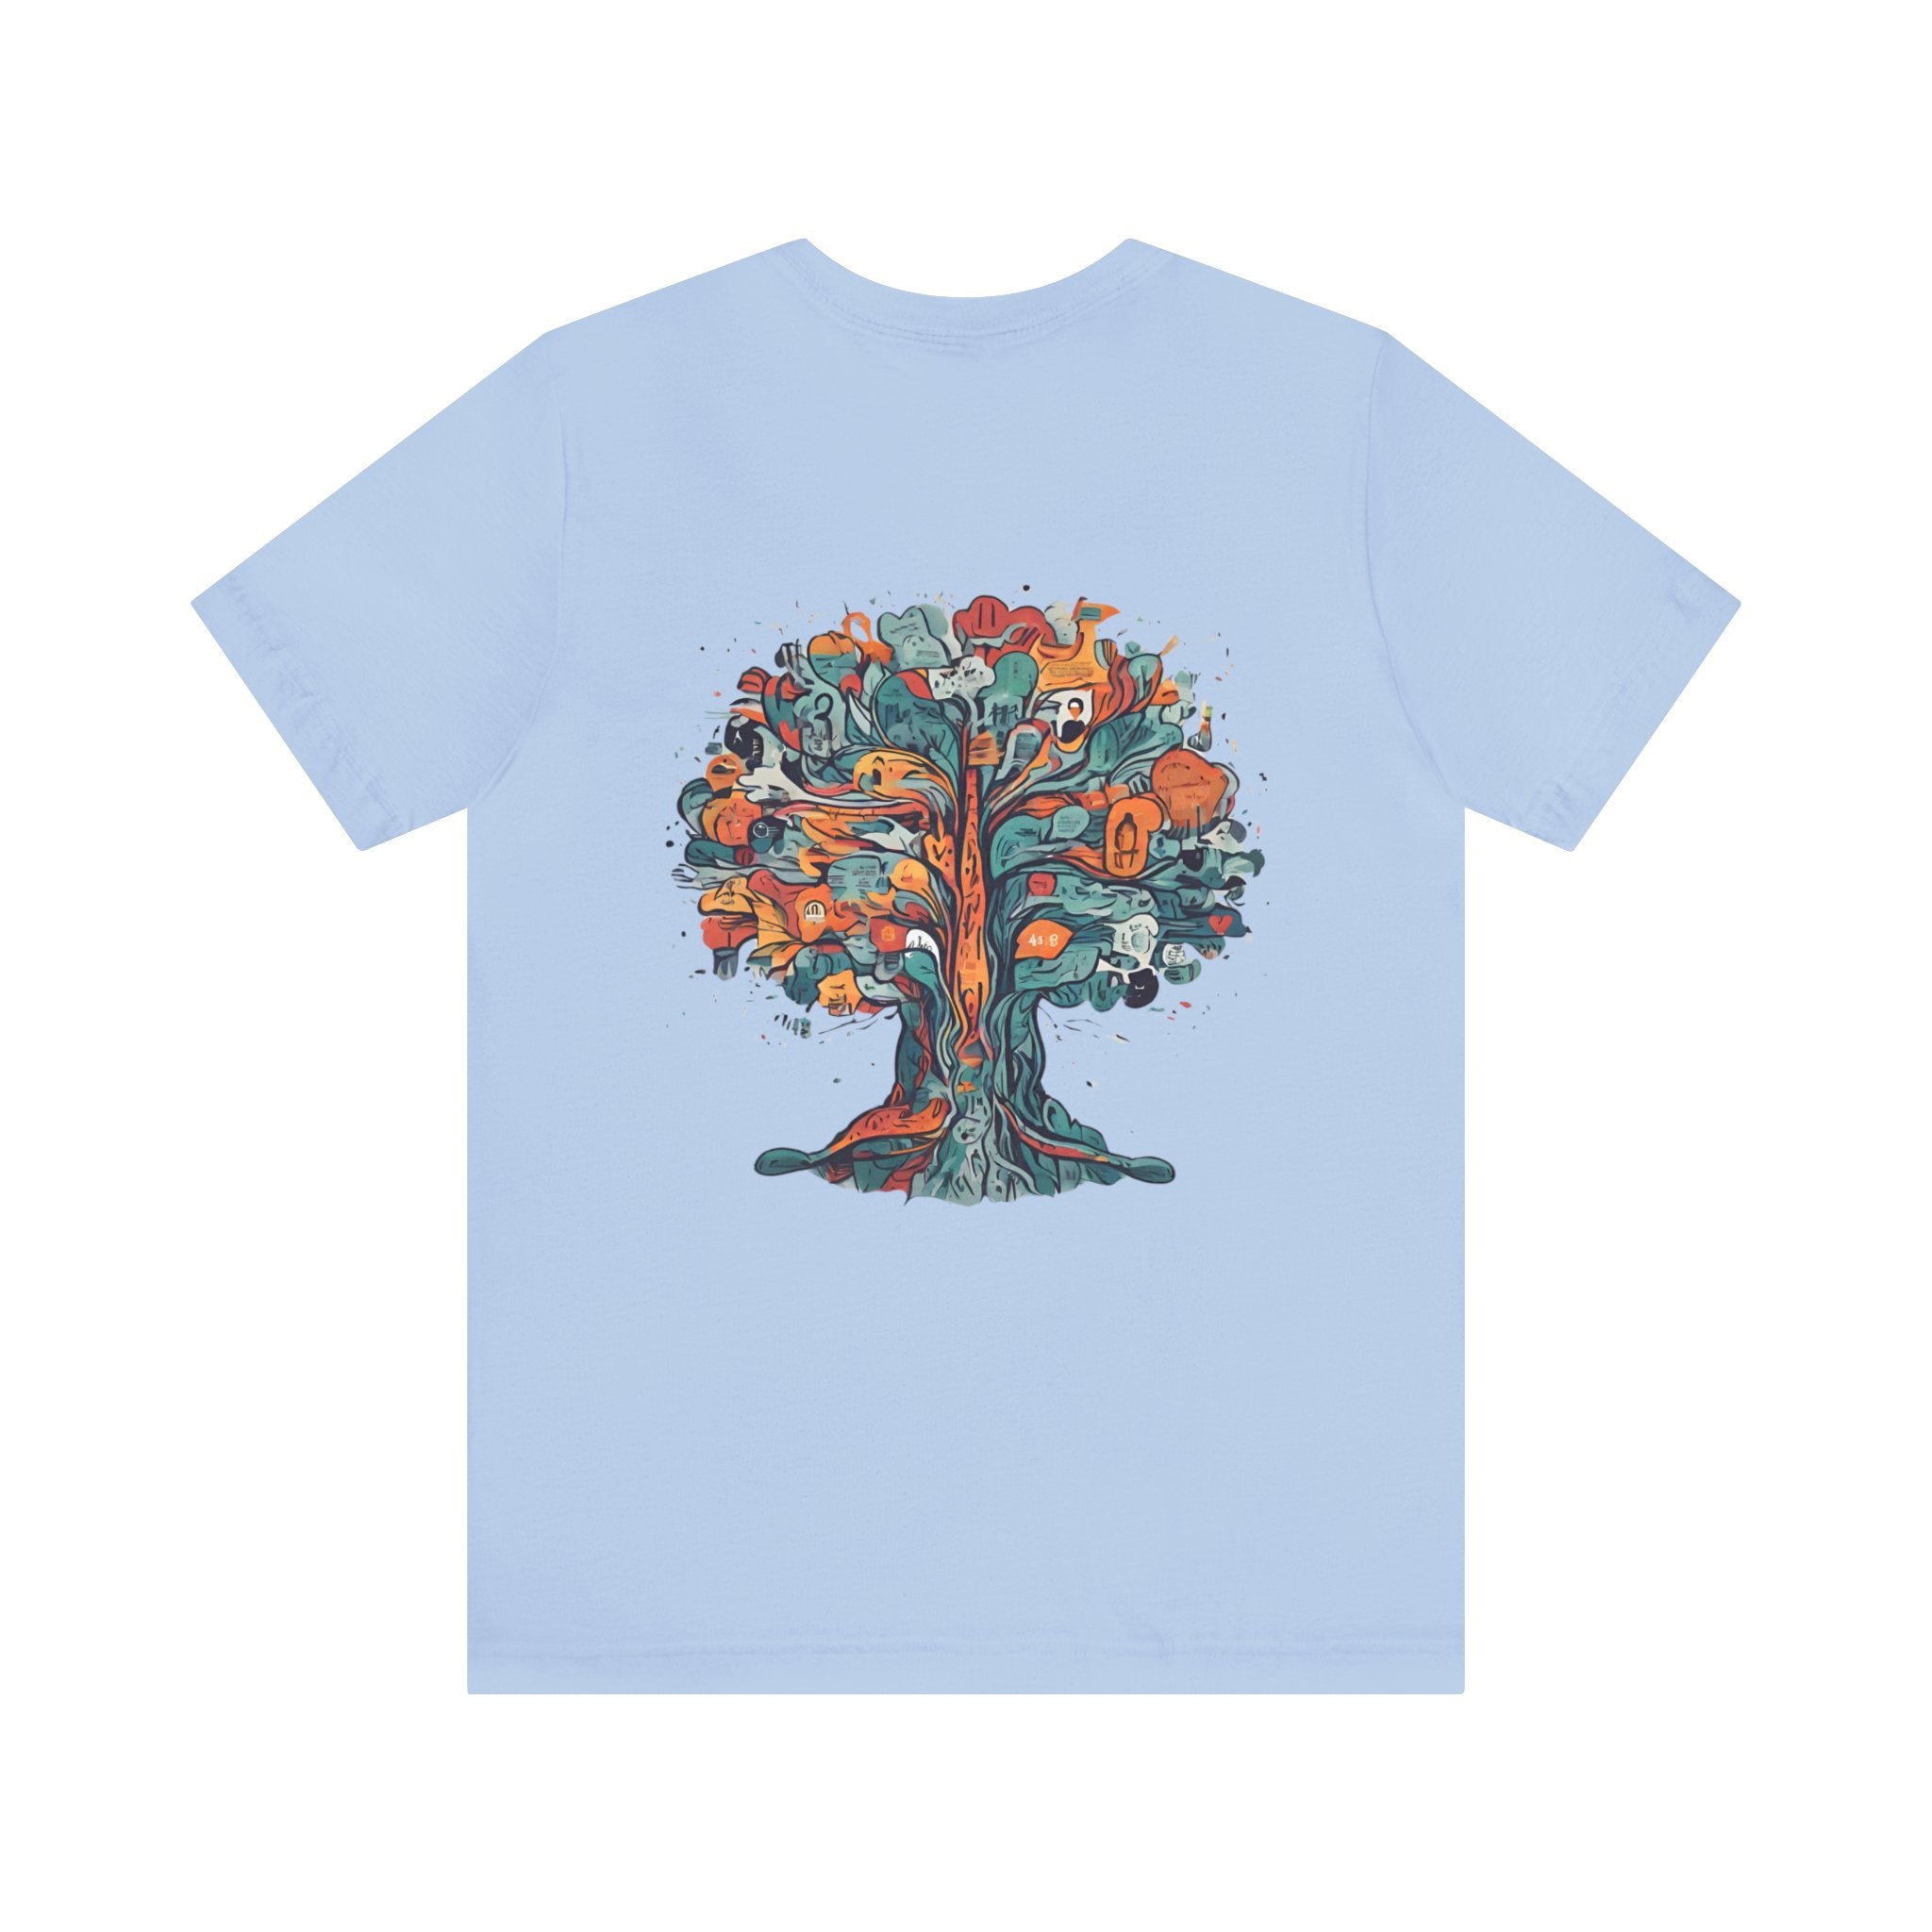 Inspire Growth Jersey Tee - Bella+Canvas 3001 Turquoise Airlume Cotton Bella+Canvas 3001 Crew Neckline Jersey Short Sleeve Lightweight Fabric Mental Health Support Retail Fit Tear-away Label Tee Unisex Tee T-Shirt 7988024393135917020_2048 Printify